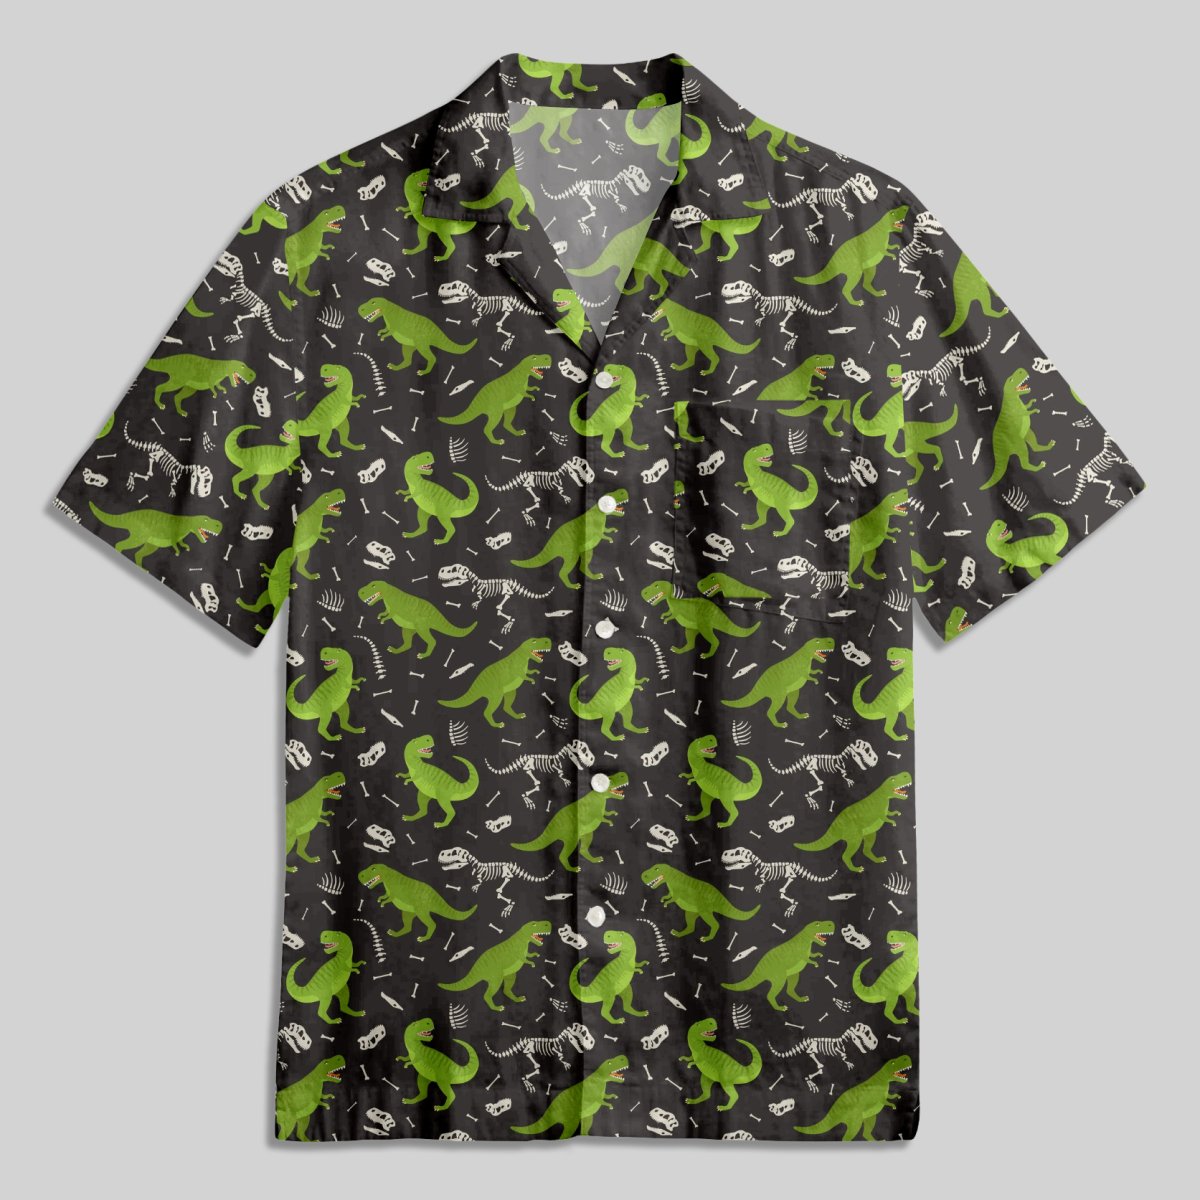 Dinosaurs And Fossils Button Up Pocket Shirt - Geeksoutfit